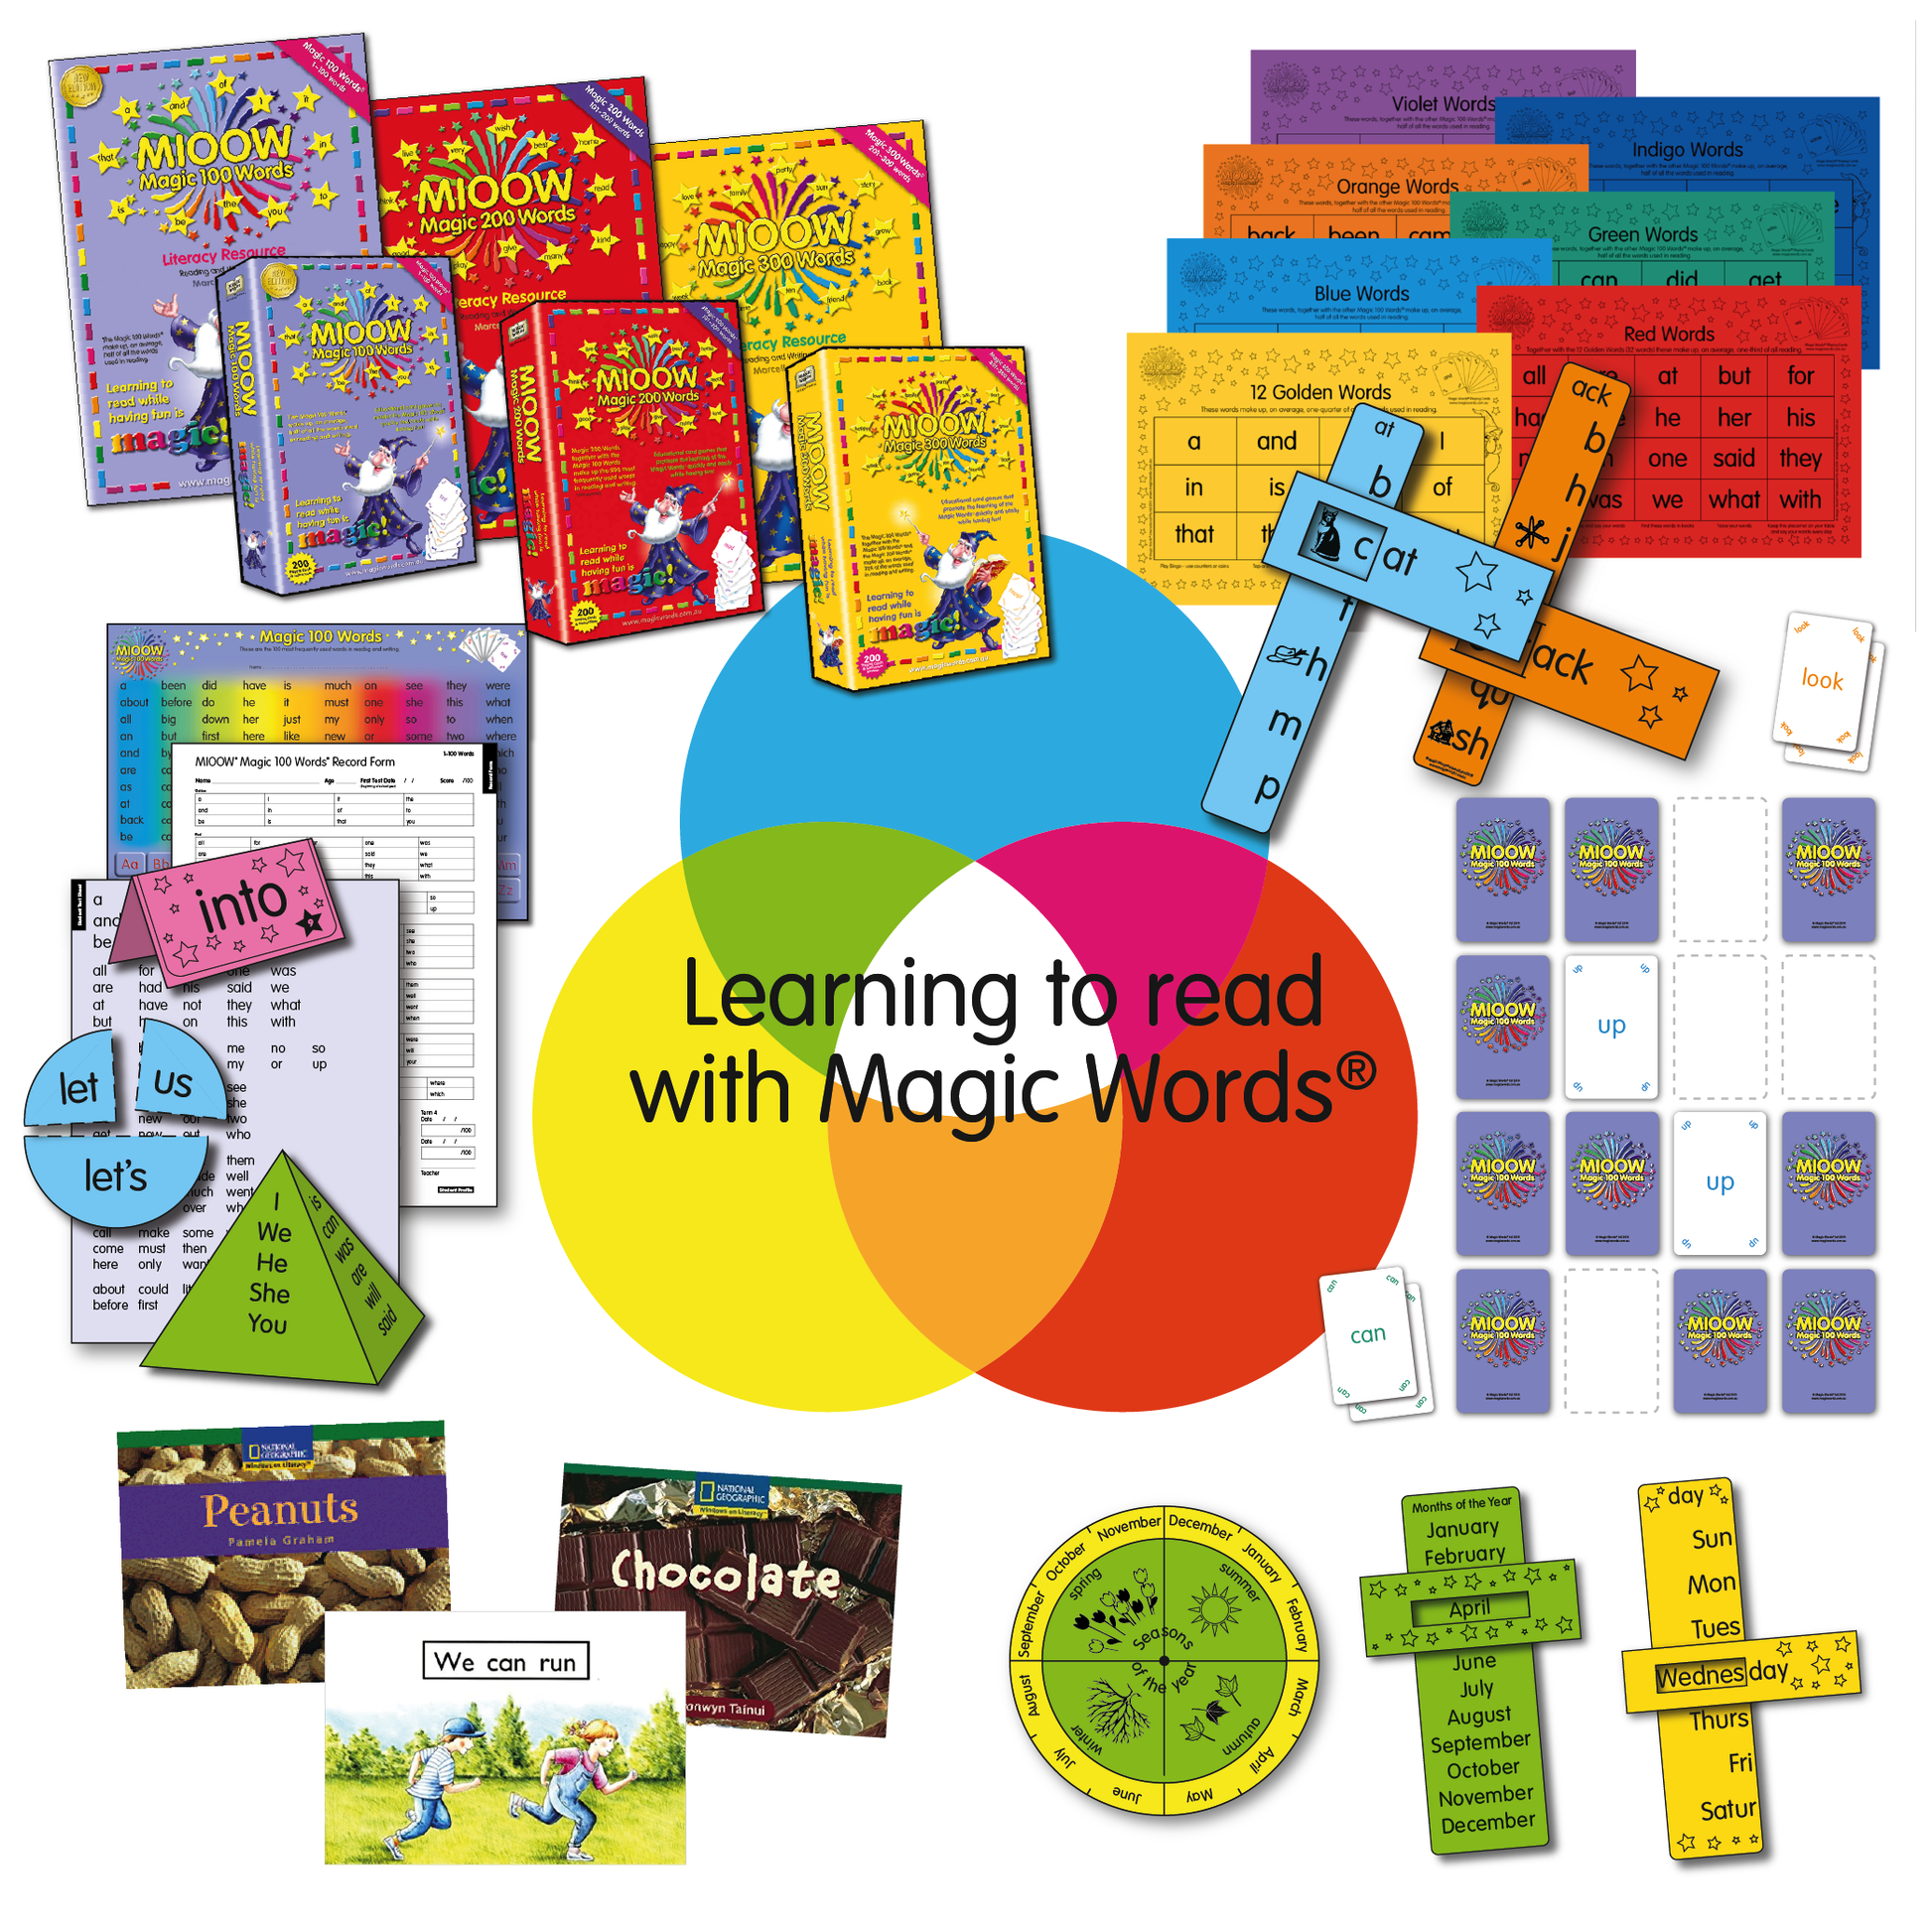 Magic Words sight words games and activites from the suite of Teaching Manuals and sight words Flashcards